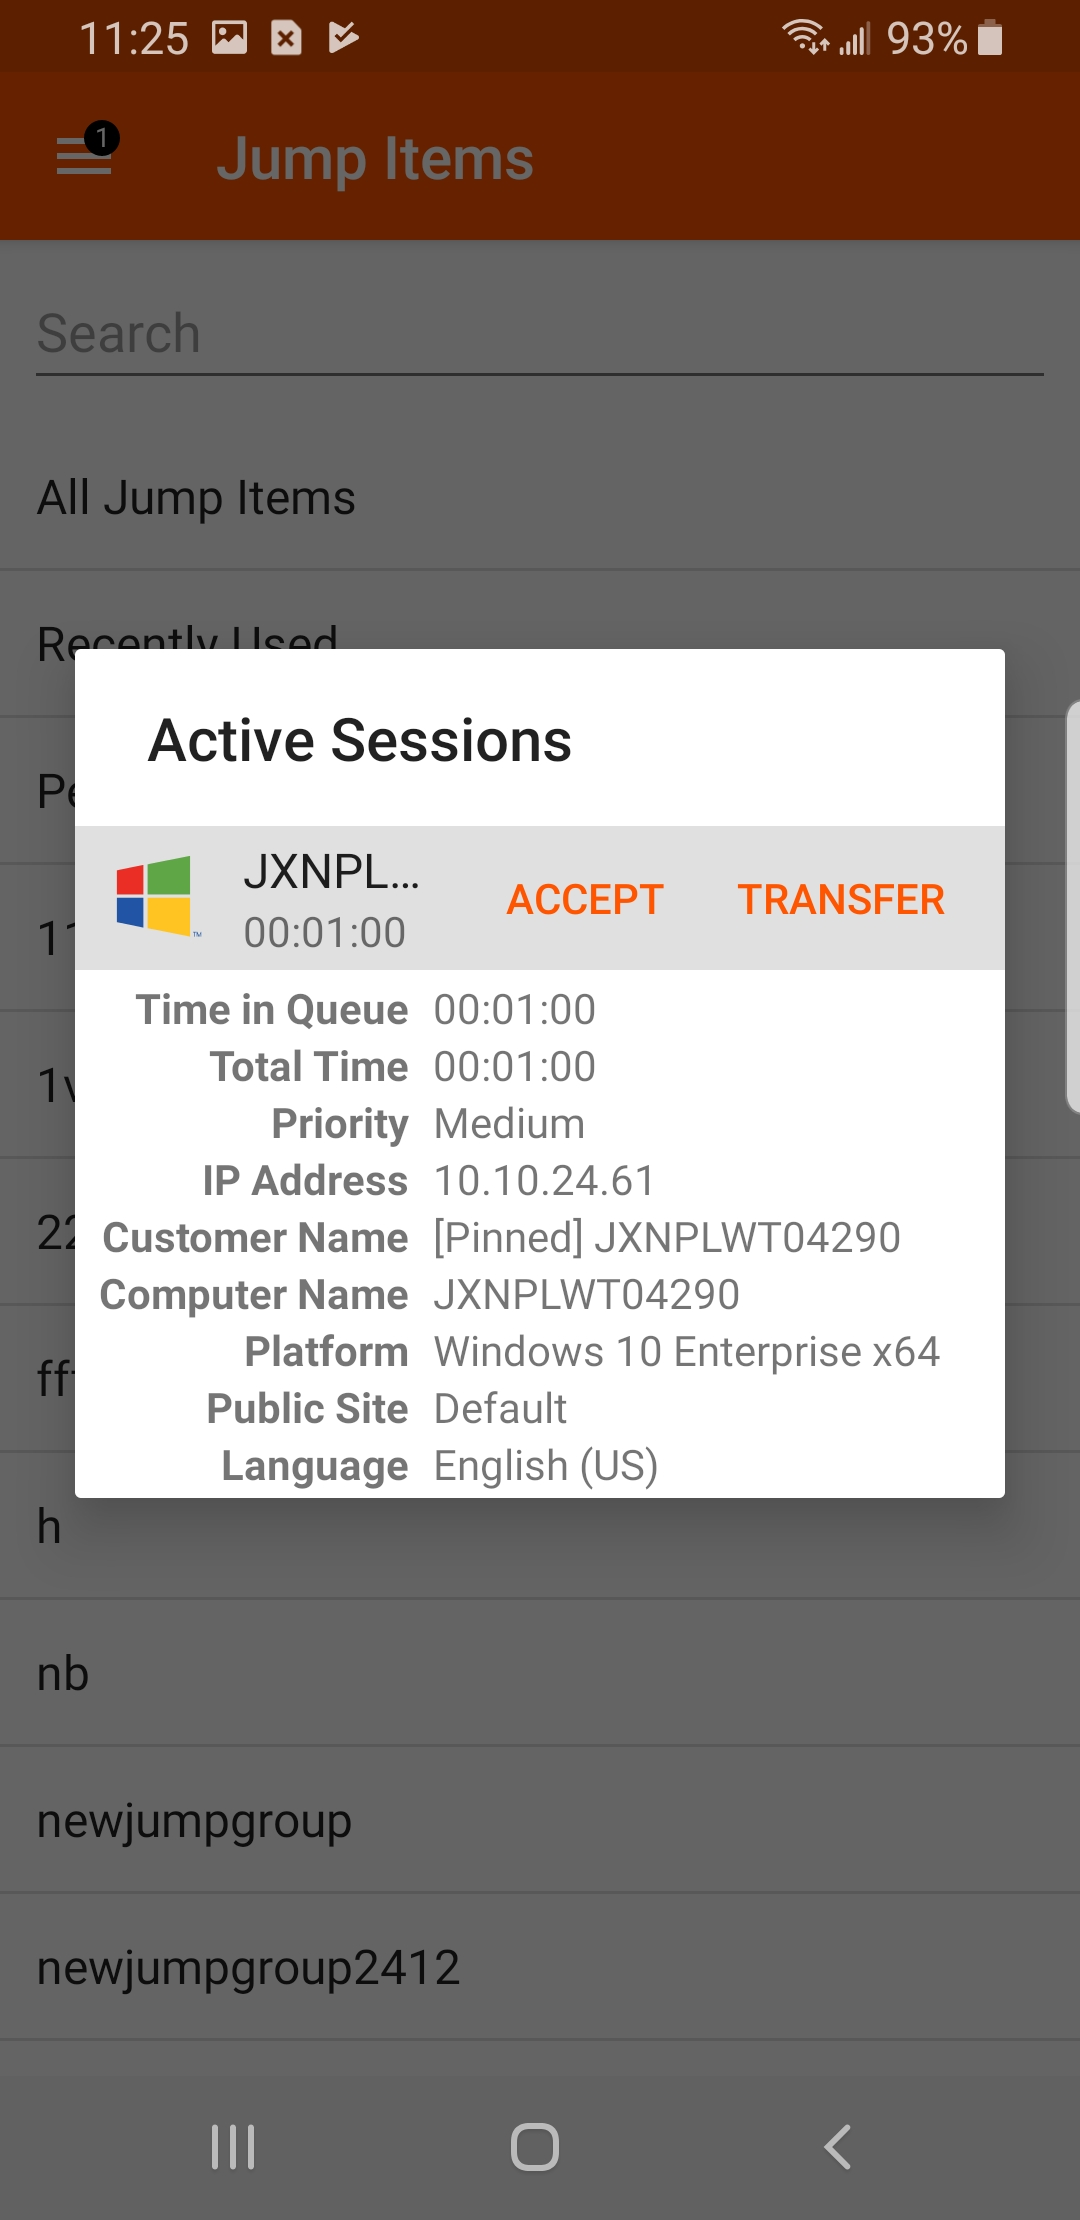 Accepting an Active Session on Android